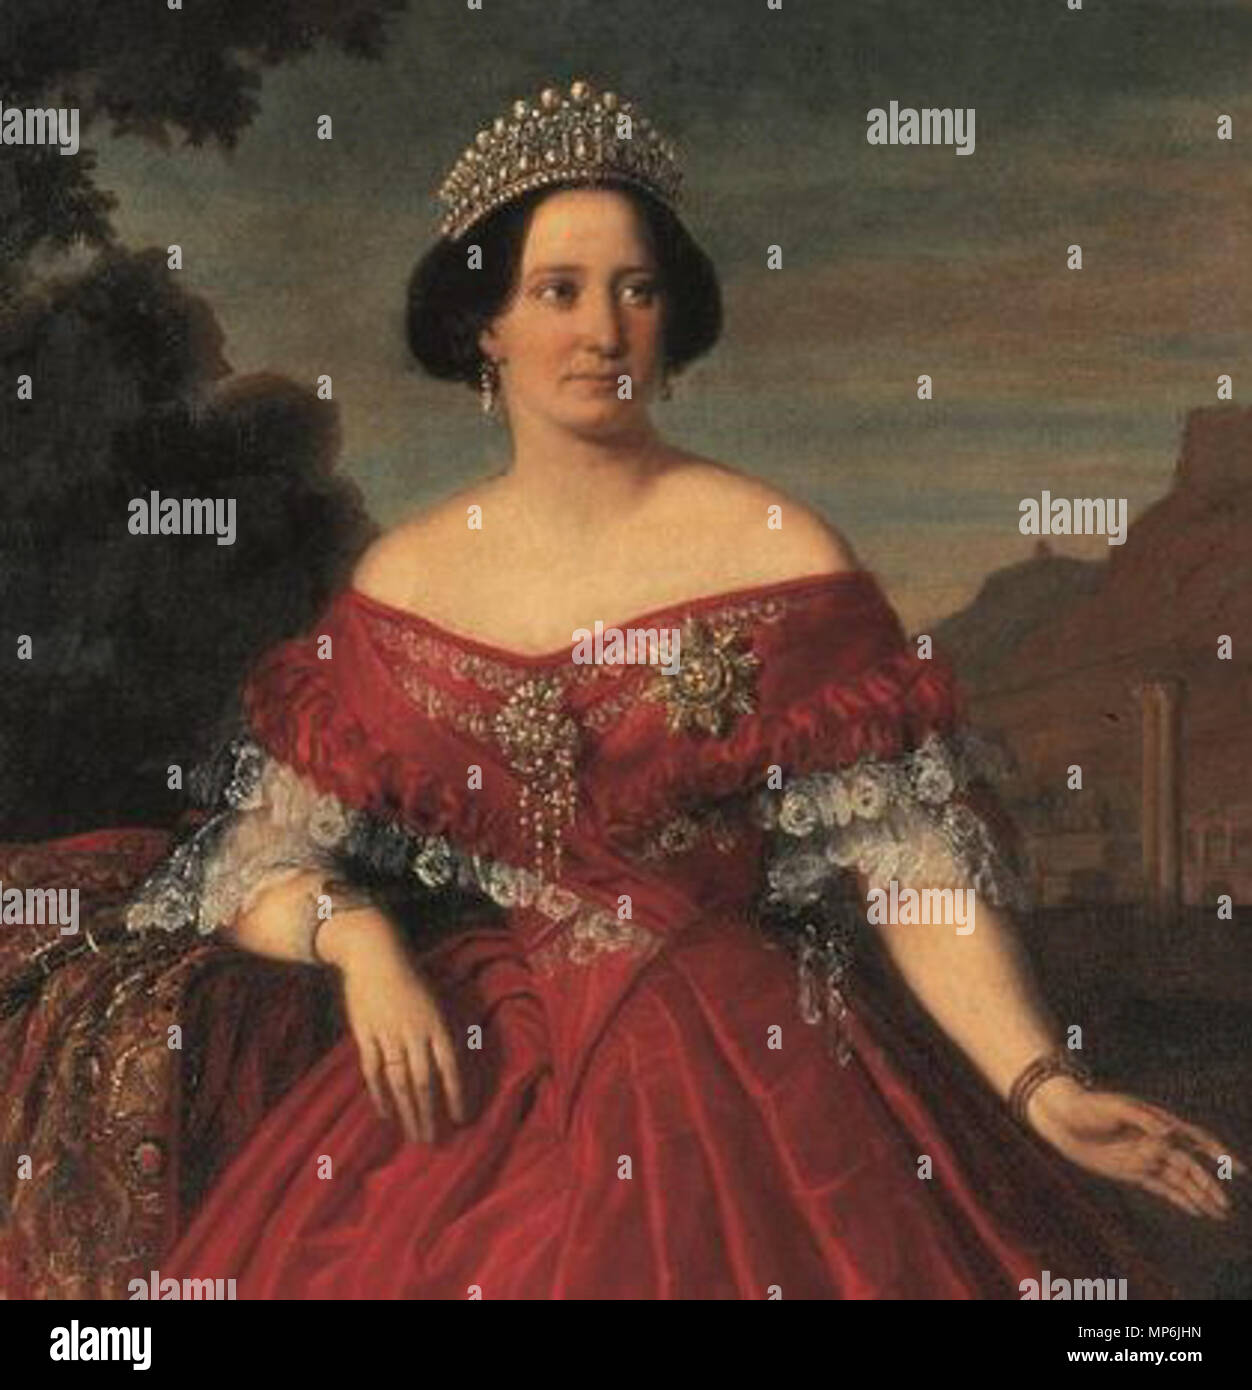 BaRes.III, G, Amalie v. Griechenland,G 9    . English: Amalia of Oldenburg, queen of Greece, in an official portrait . 7 August 2015, 14:24:24. Carl Rahl 1035 Queen Amalia of Greece Stock Photo